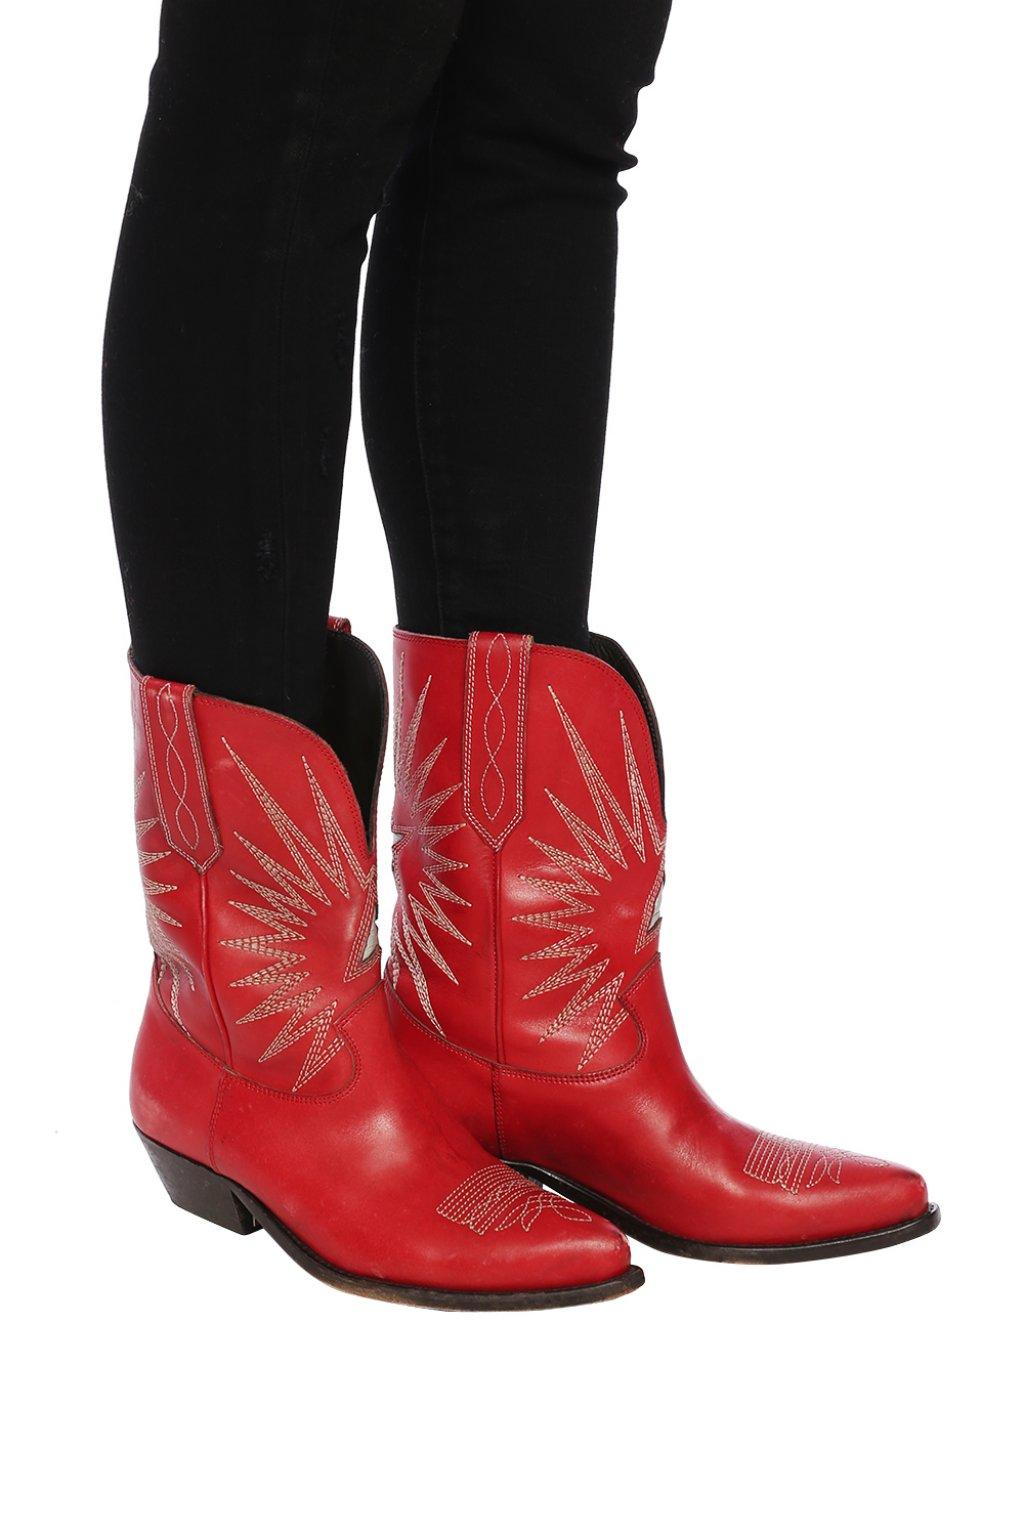 Golden Goose 'wish Star' Leather Ankle Boots in Red | Lyst